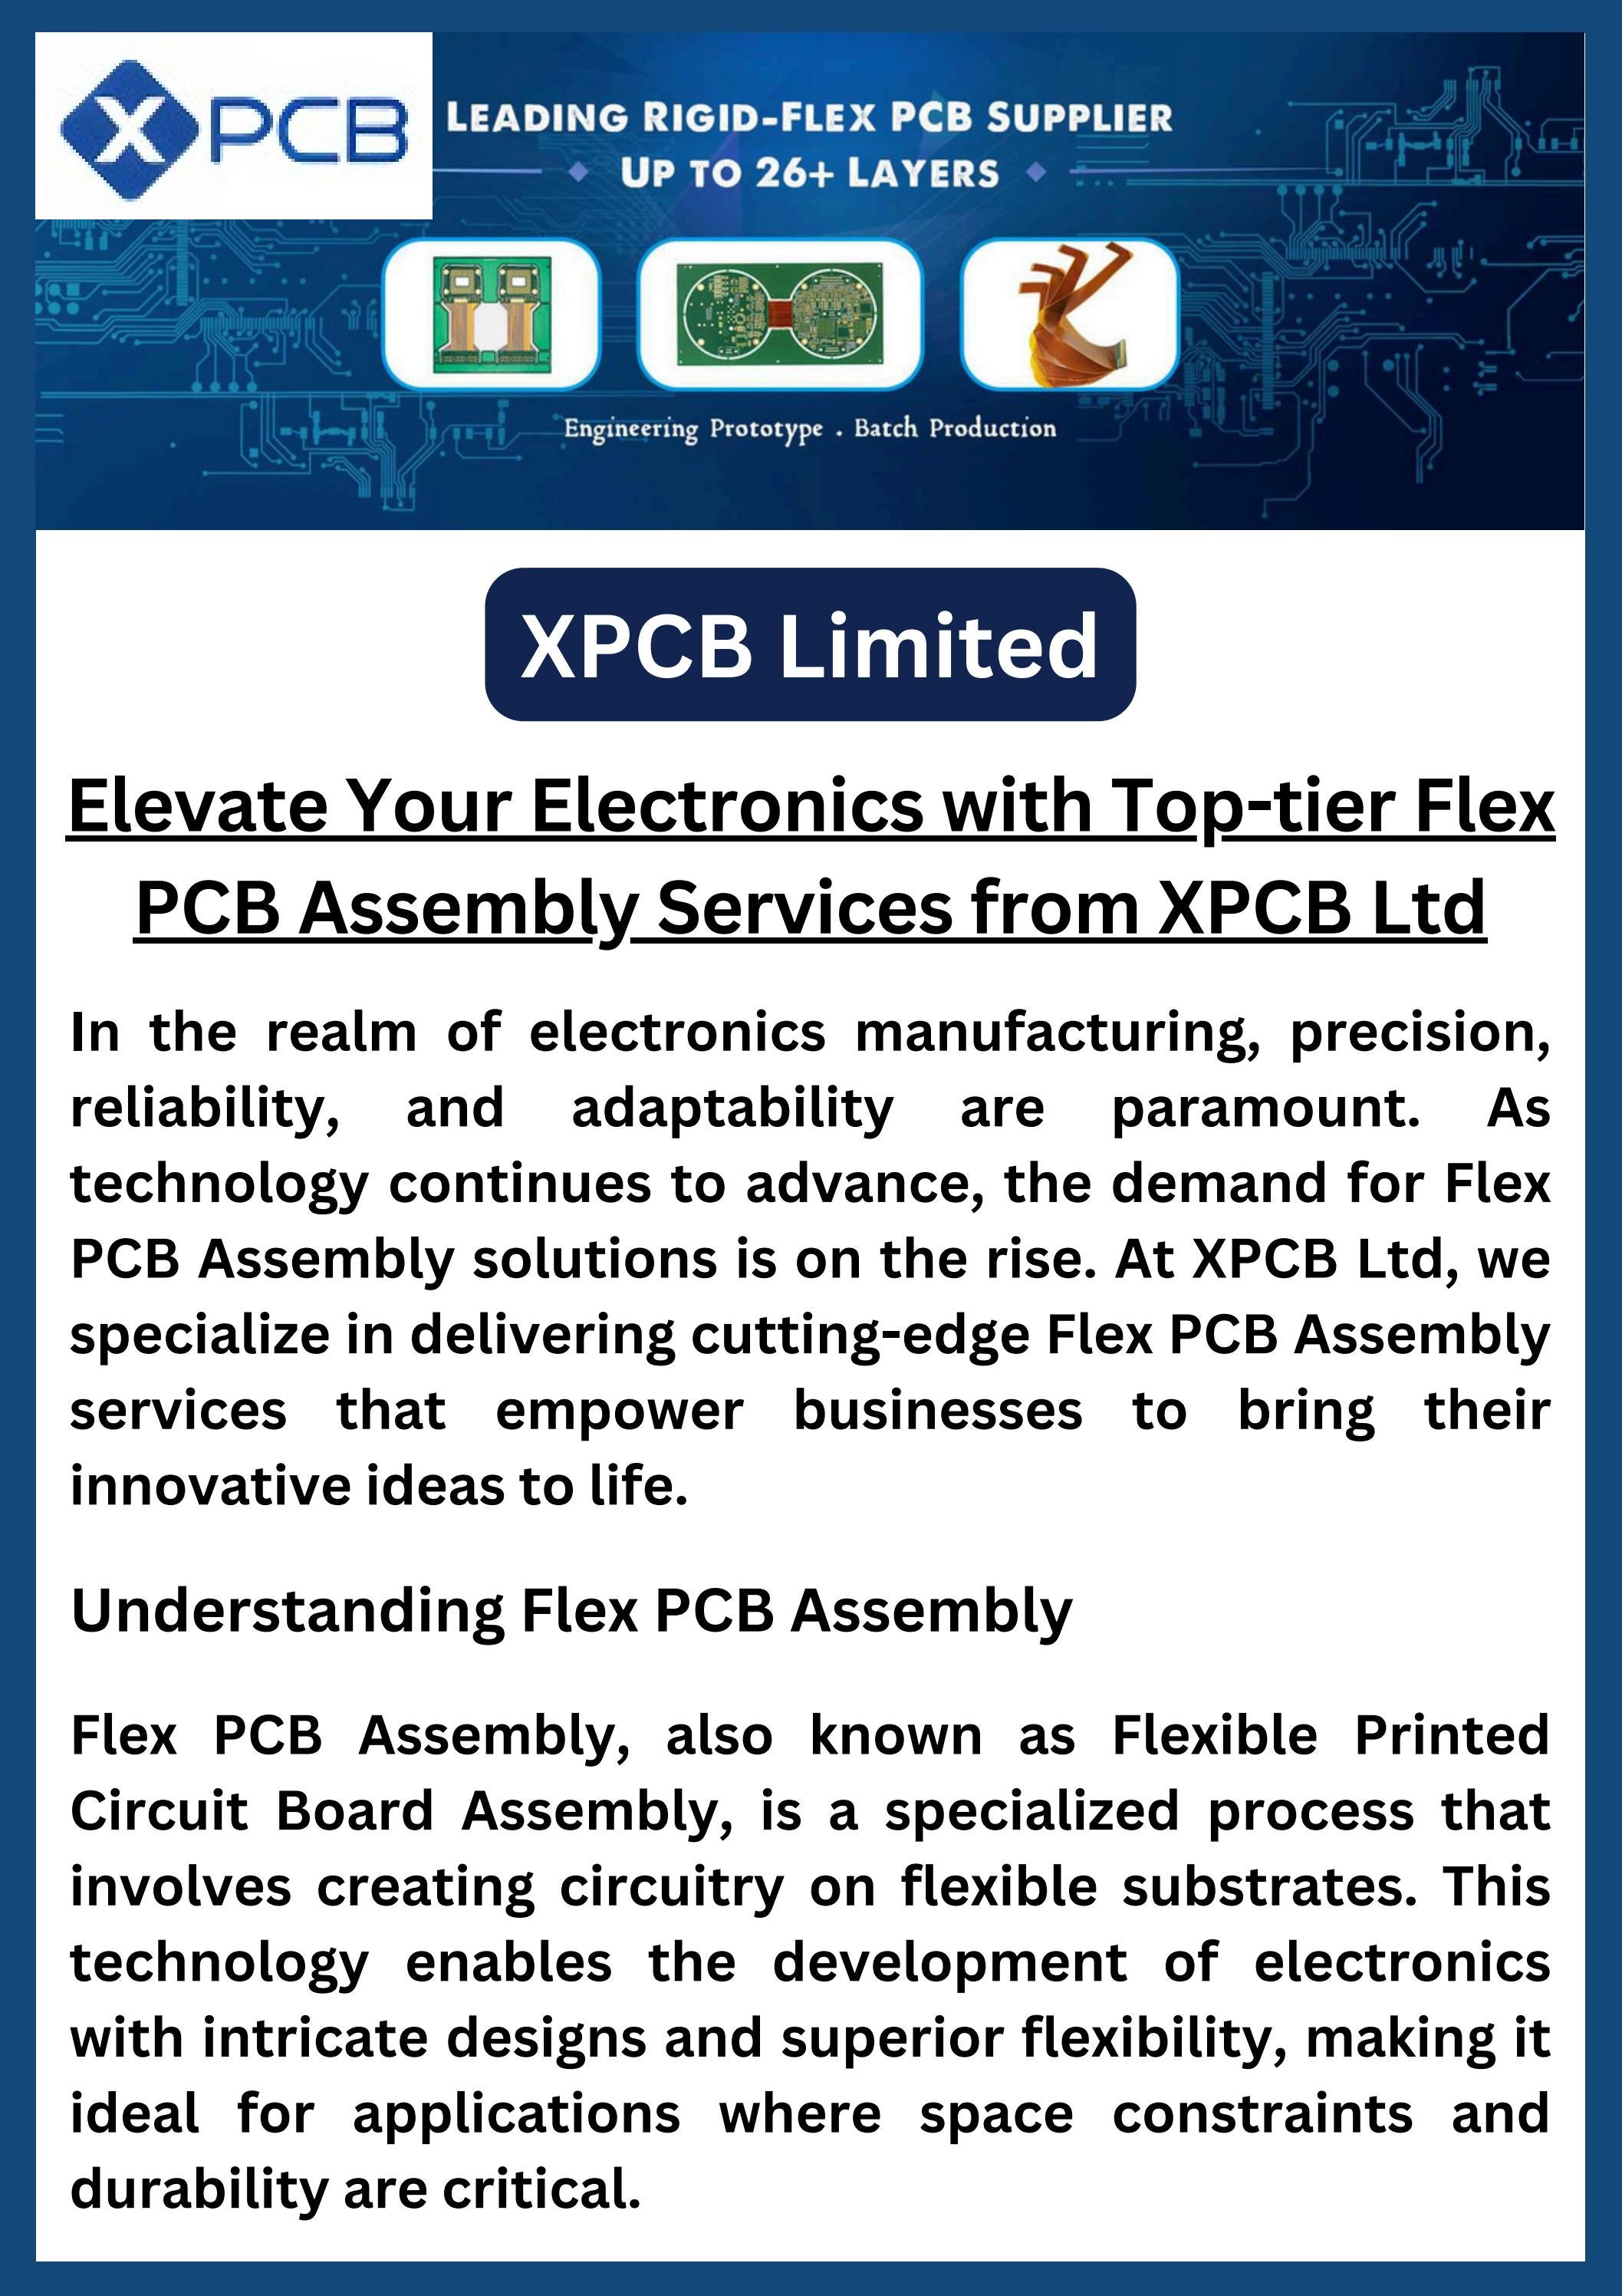 Elevate Your Electronics with Top-tier Flex PCB Assembly Services from XPCB Ltd